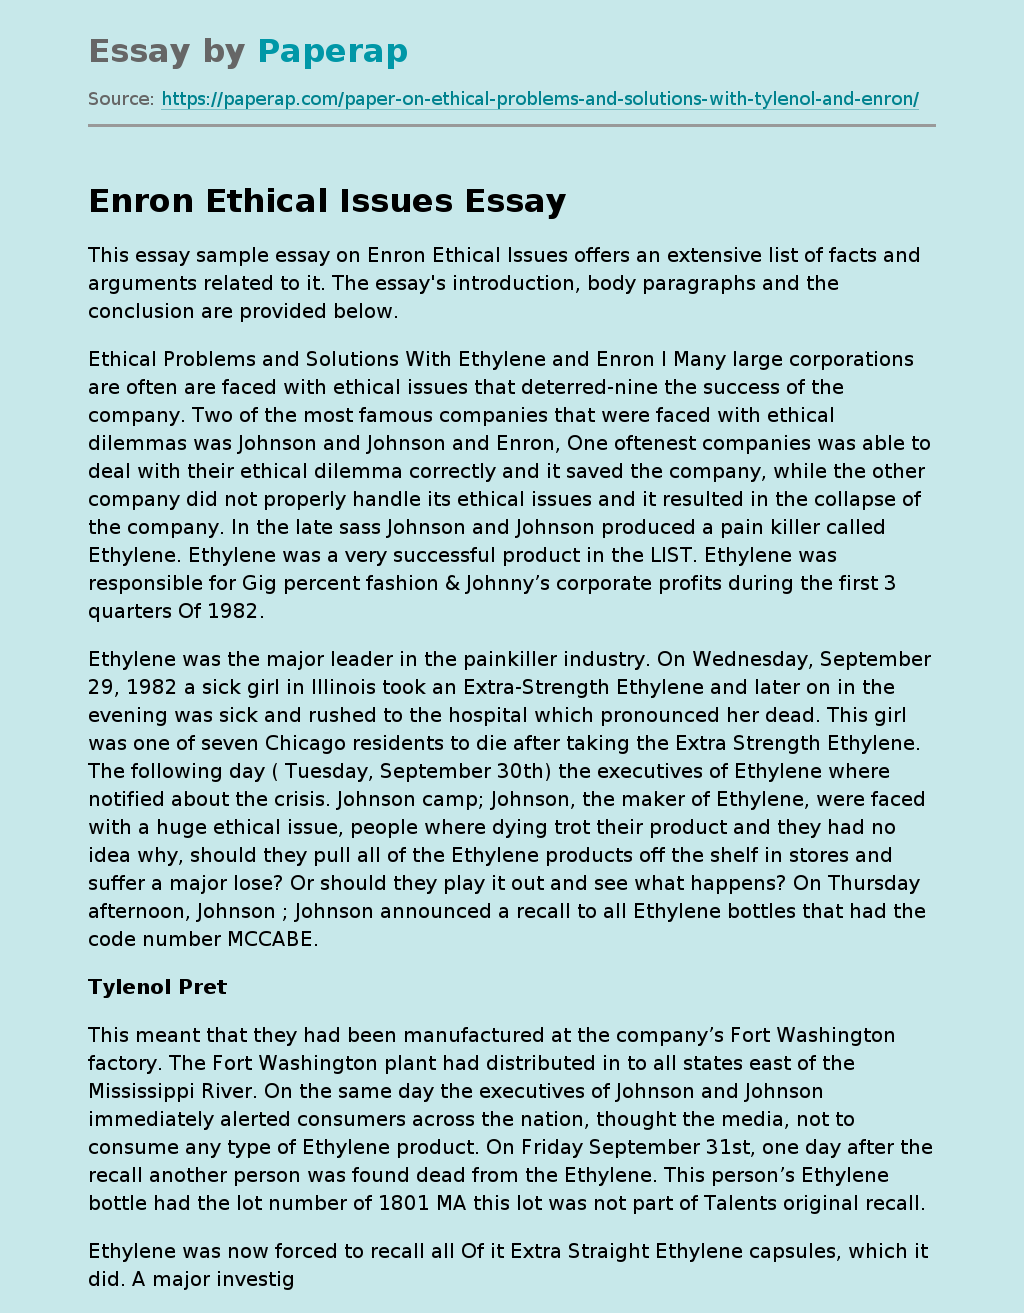 Enron Ethical Issues